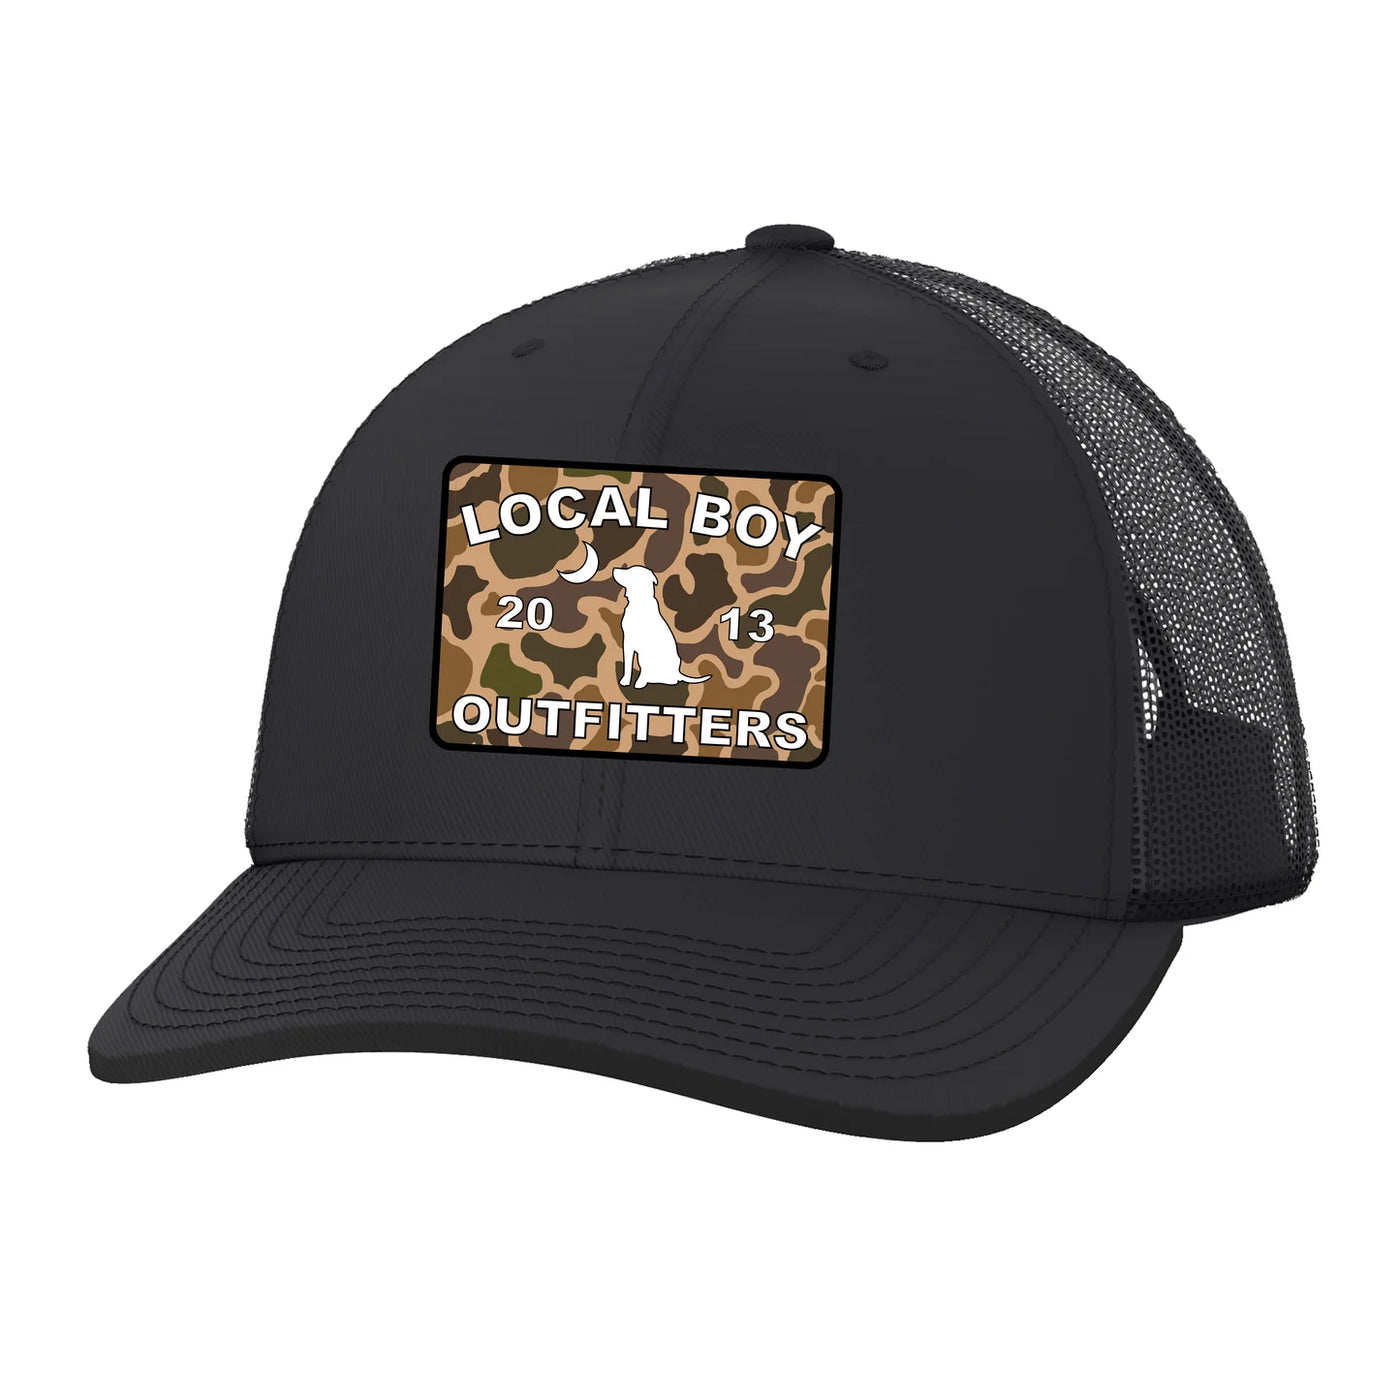 Local Boy Outfitters Old School Patch Hat Black